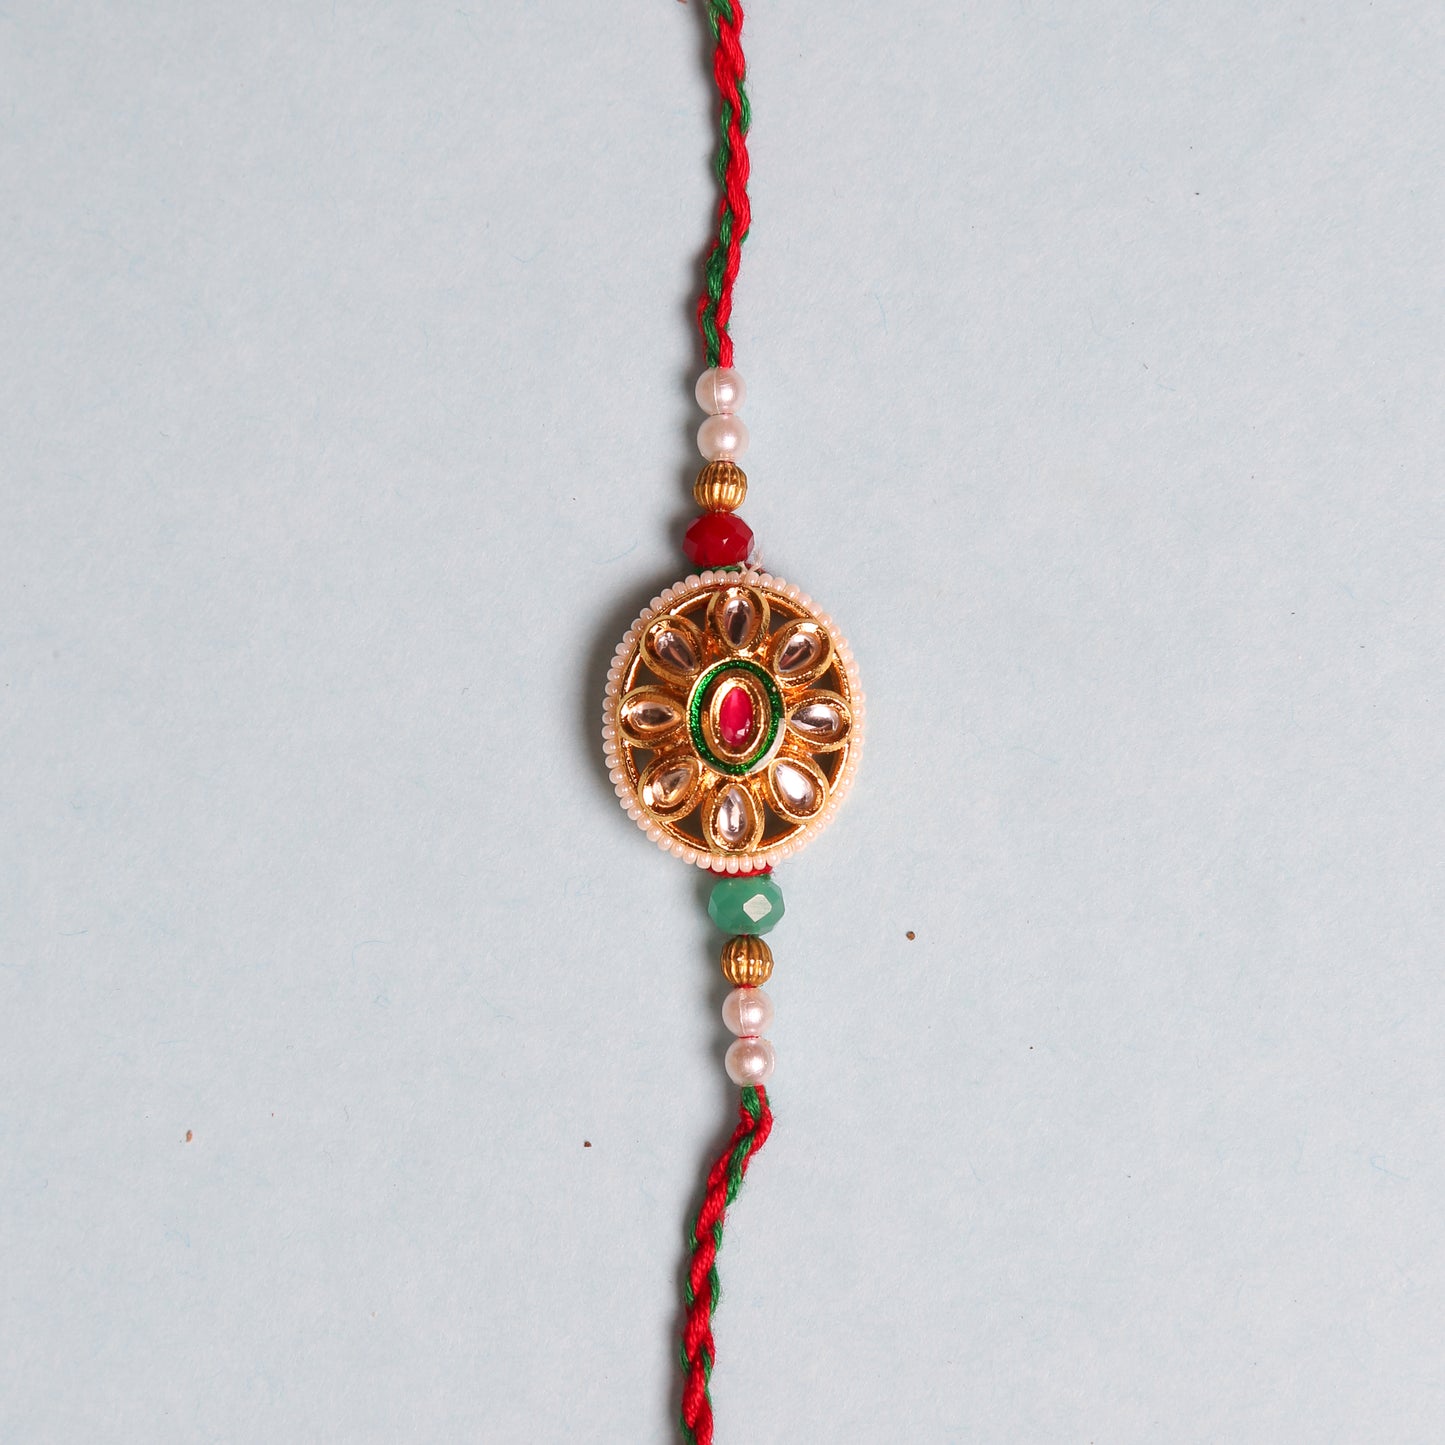 Rakhi with red and green beads, embellished with stones, looks stunning.